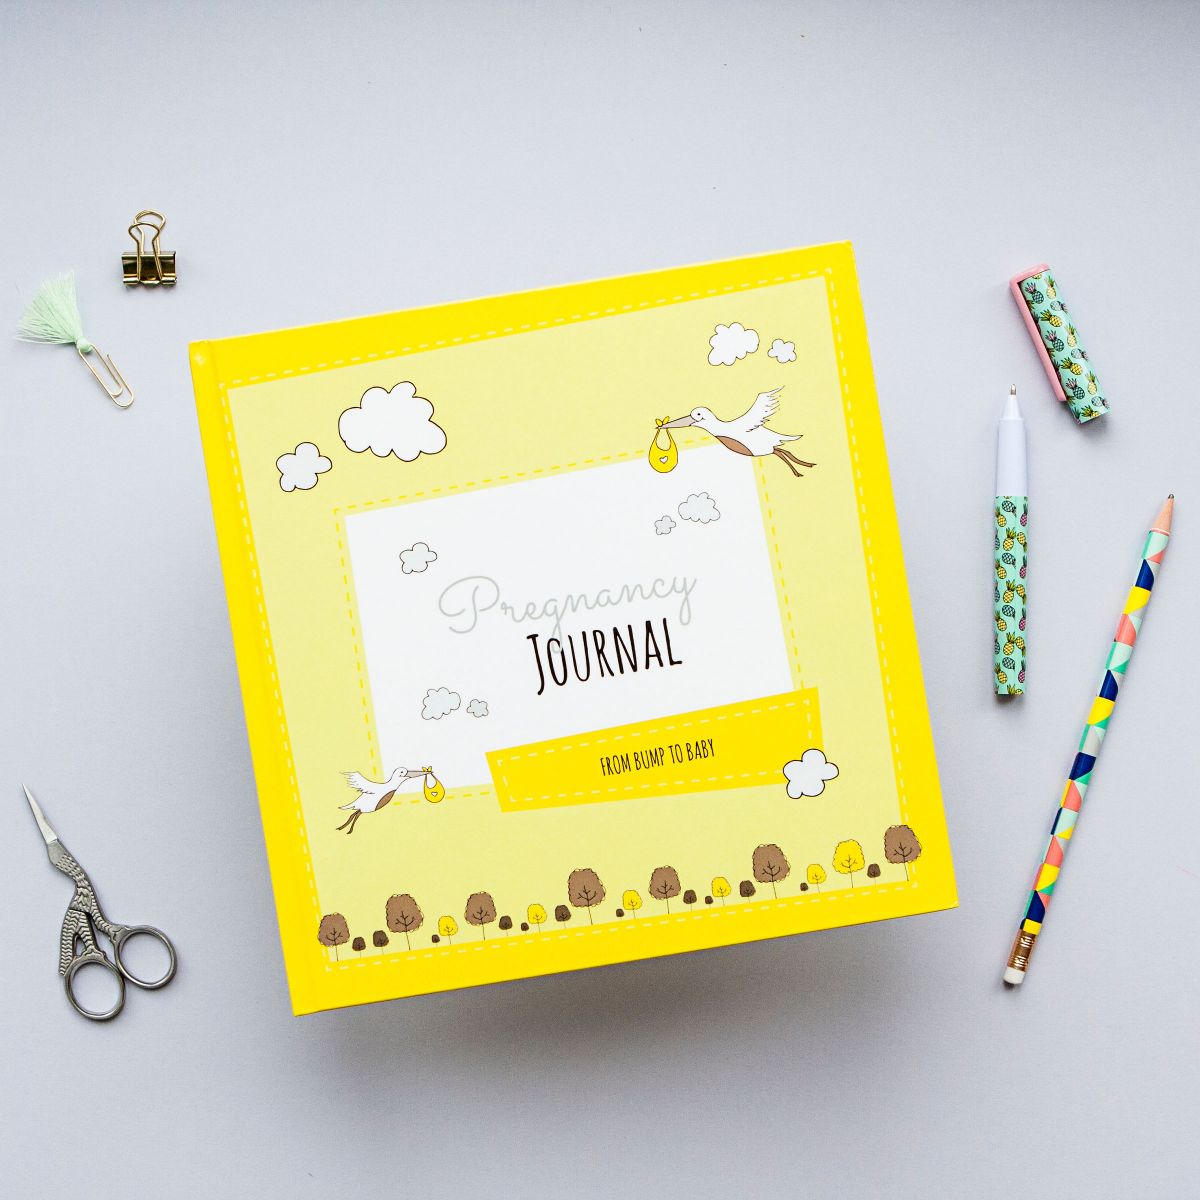 Bump Box Subscription: The Perfect Gift For Baby Showers And Pregnancy